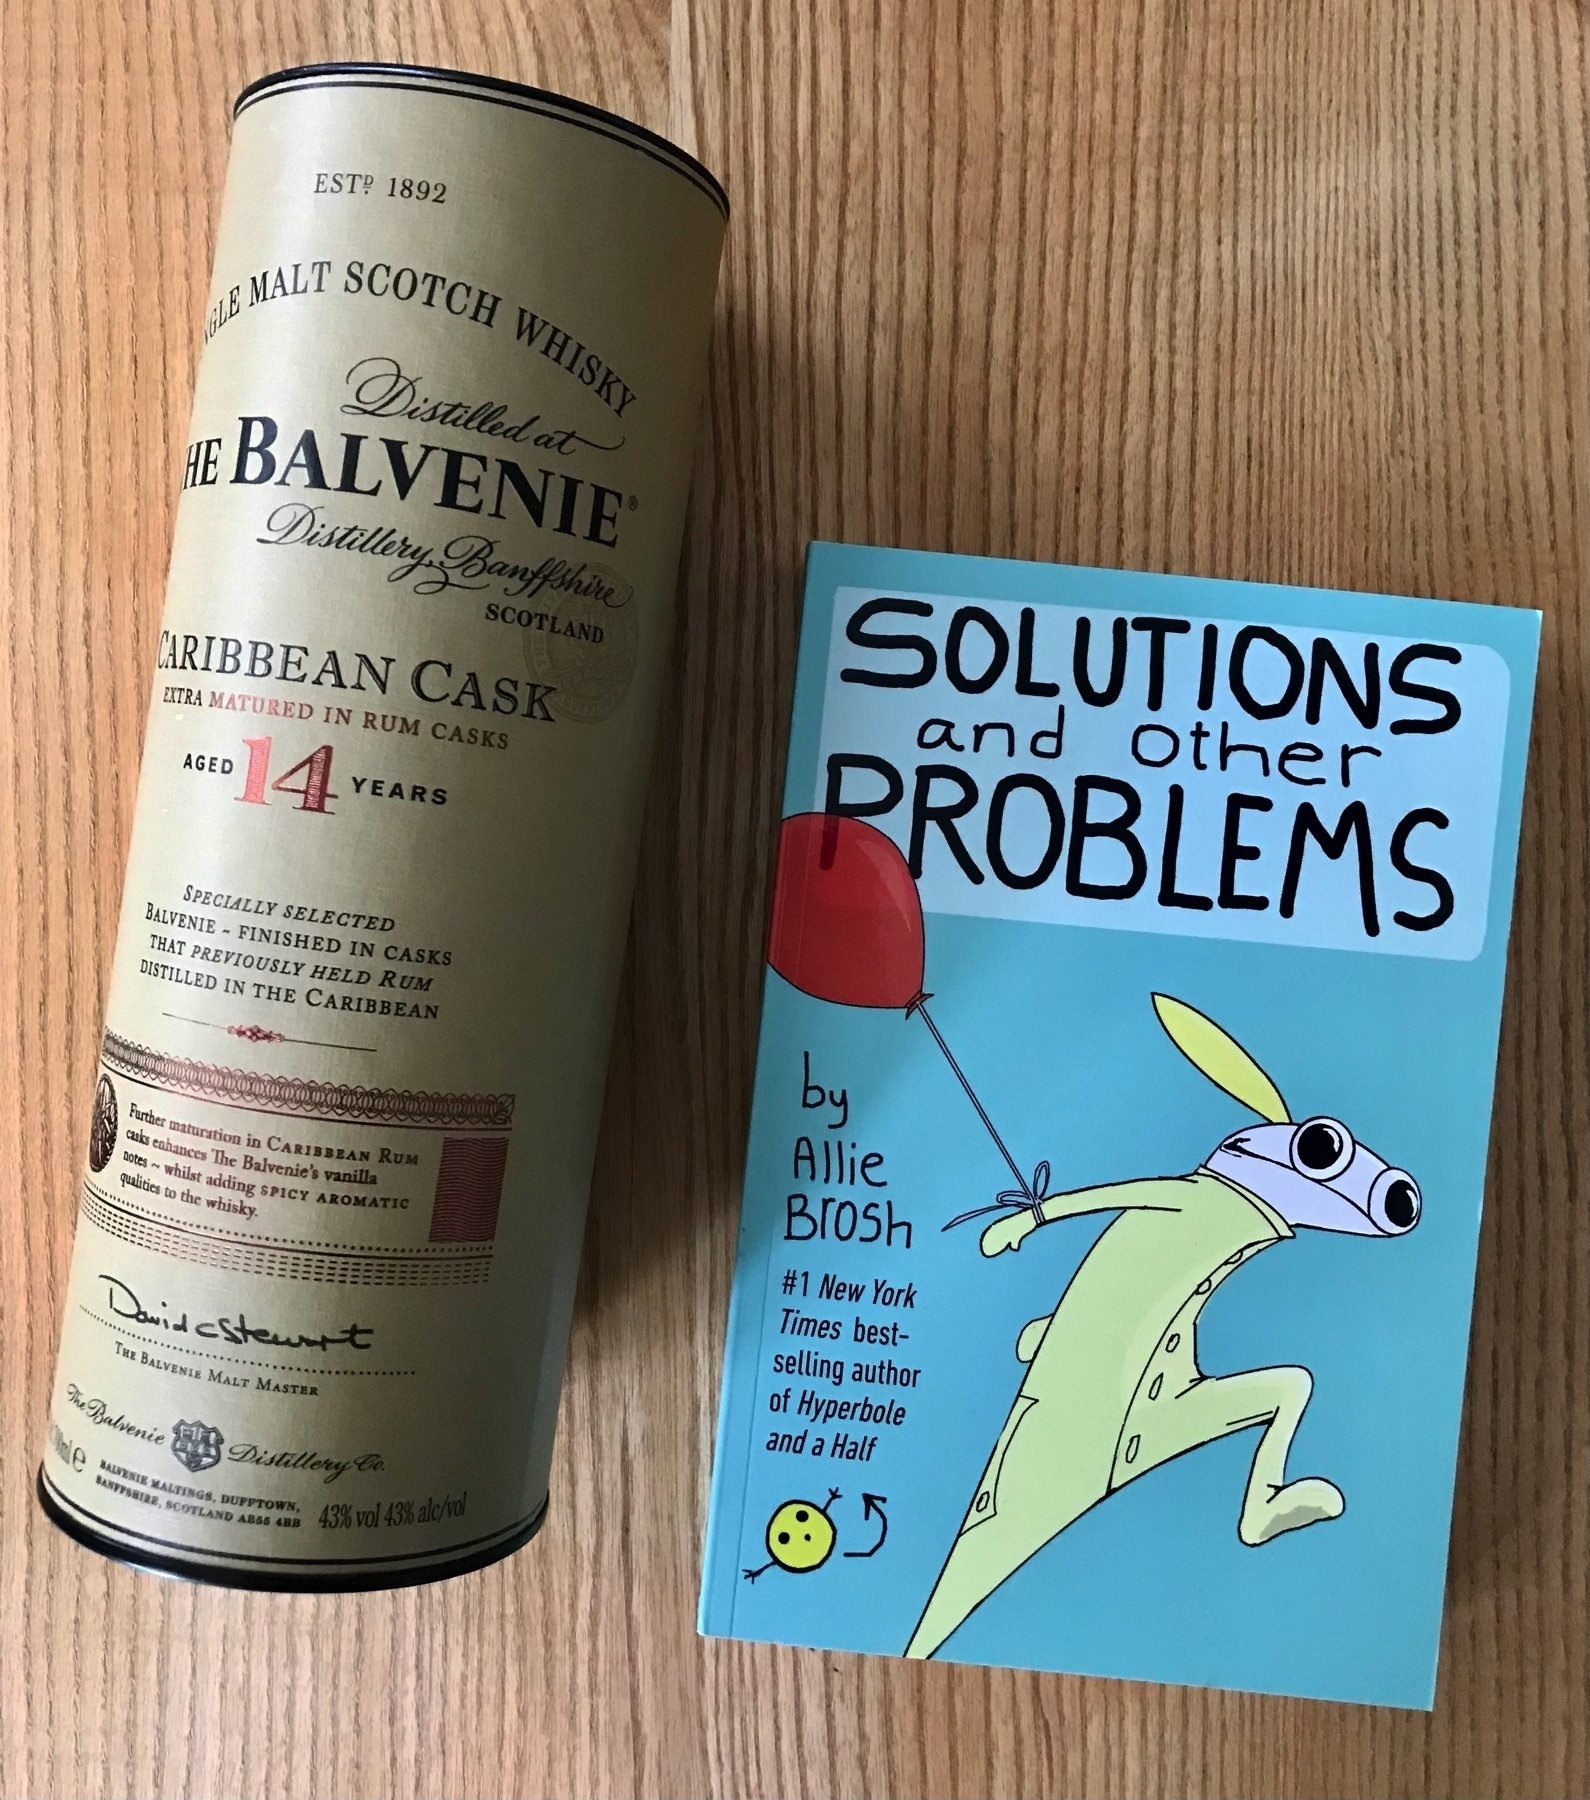 Tubublar packaging containing a bottle of Balvenie Caribbean Cask whisky and the new book by Allie Brosh on a wooden table.